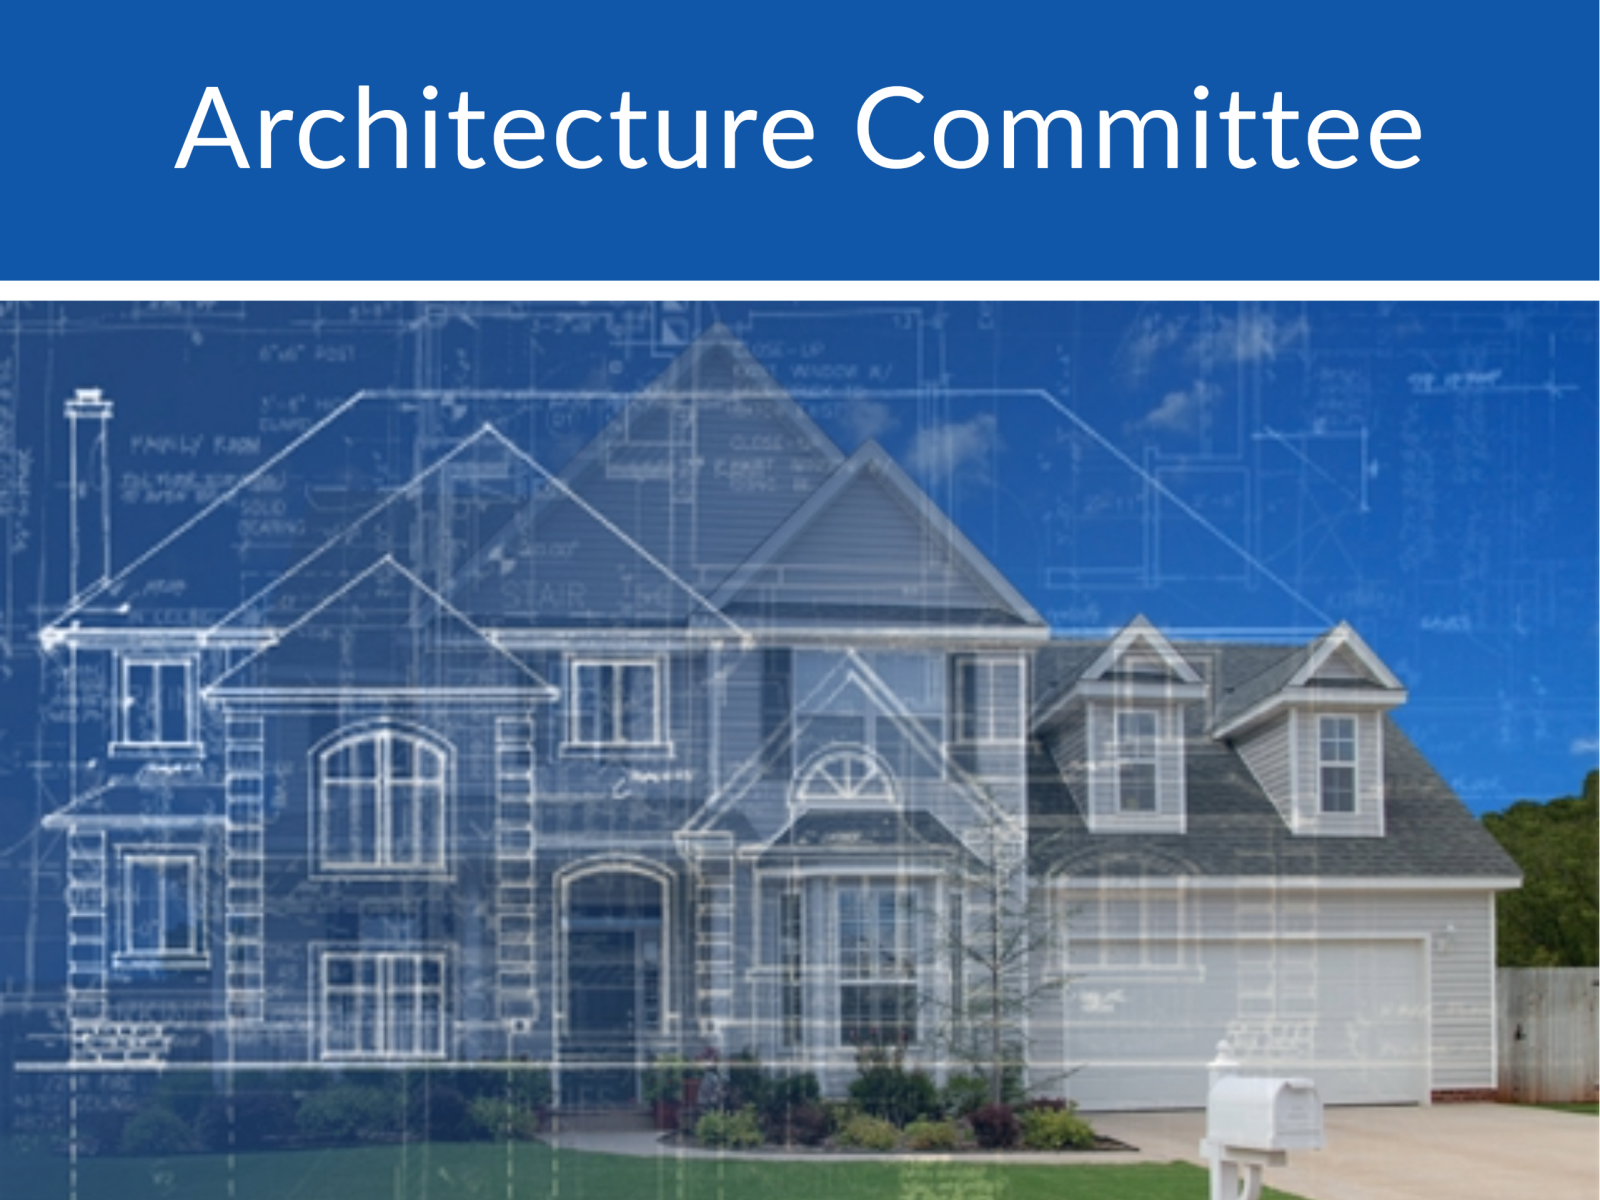 Architectural Committee